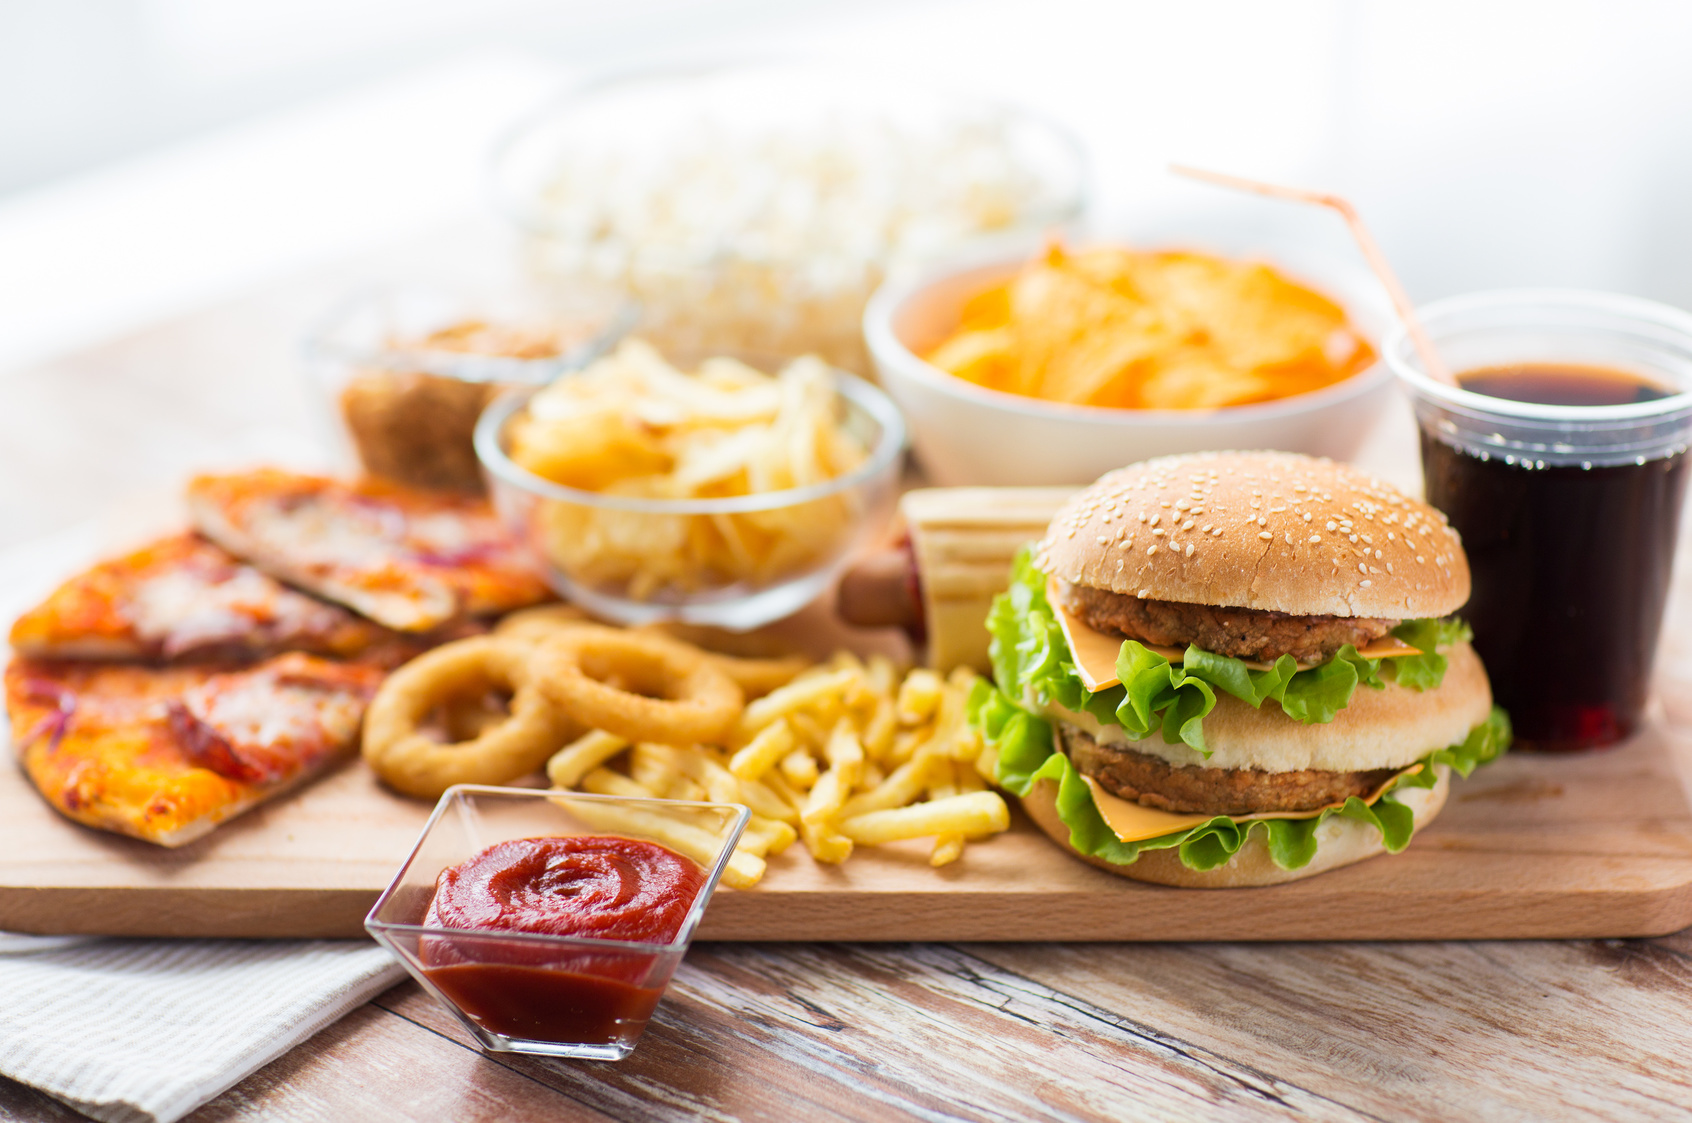 close up of fast food snacks and drink on table alimenti ultra.trasformati